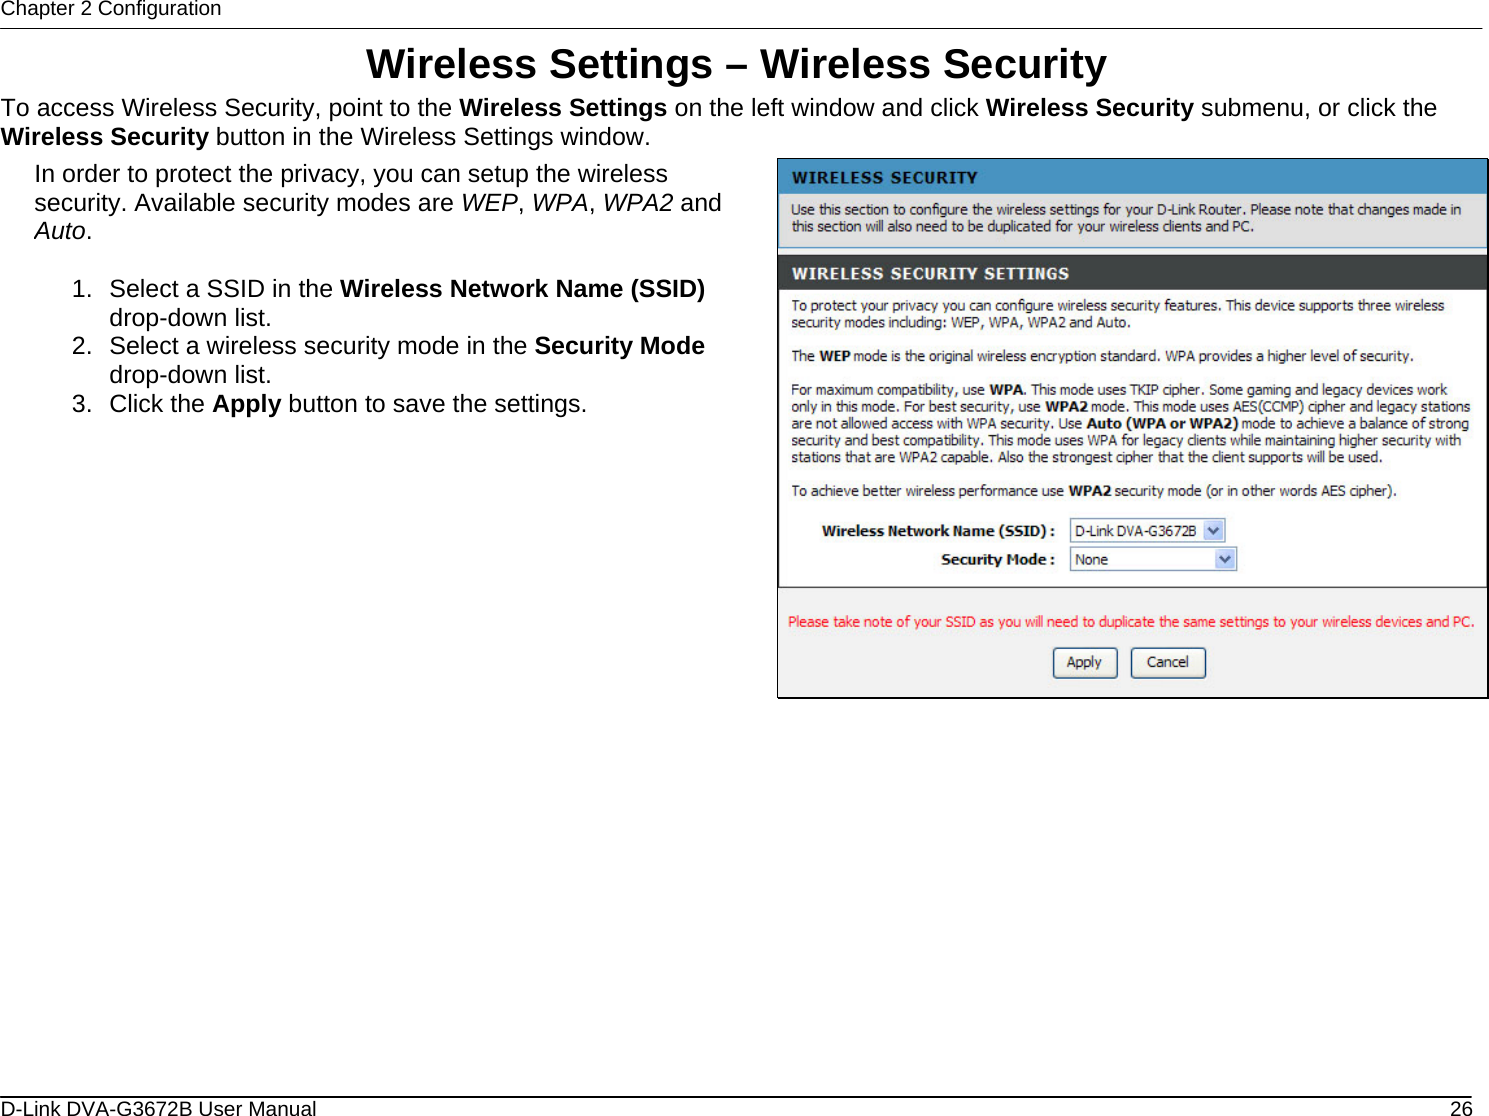 Chapter 2 Configuration Wireless Settings – Wireless Security To access Wireless Security, point to the Wireless Settings on the left window and click Wireless Security submenu, or click the Wireless Security button in the Wireless Settings window. In order to protect the privacy, you can setup the wireless security. Available security modes are WEP, WPA, WPA2 and Auto.  1.  Select a SSID in the Wireless Network Name (SSID) drop-down list. 2.  Select a wireless security mode in the Security Mode drop-down list. 3. Click the Apply button to save the settings.               D-Link DVA-G3672B User Manual  26